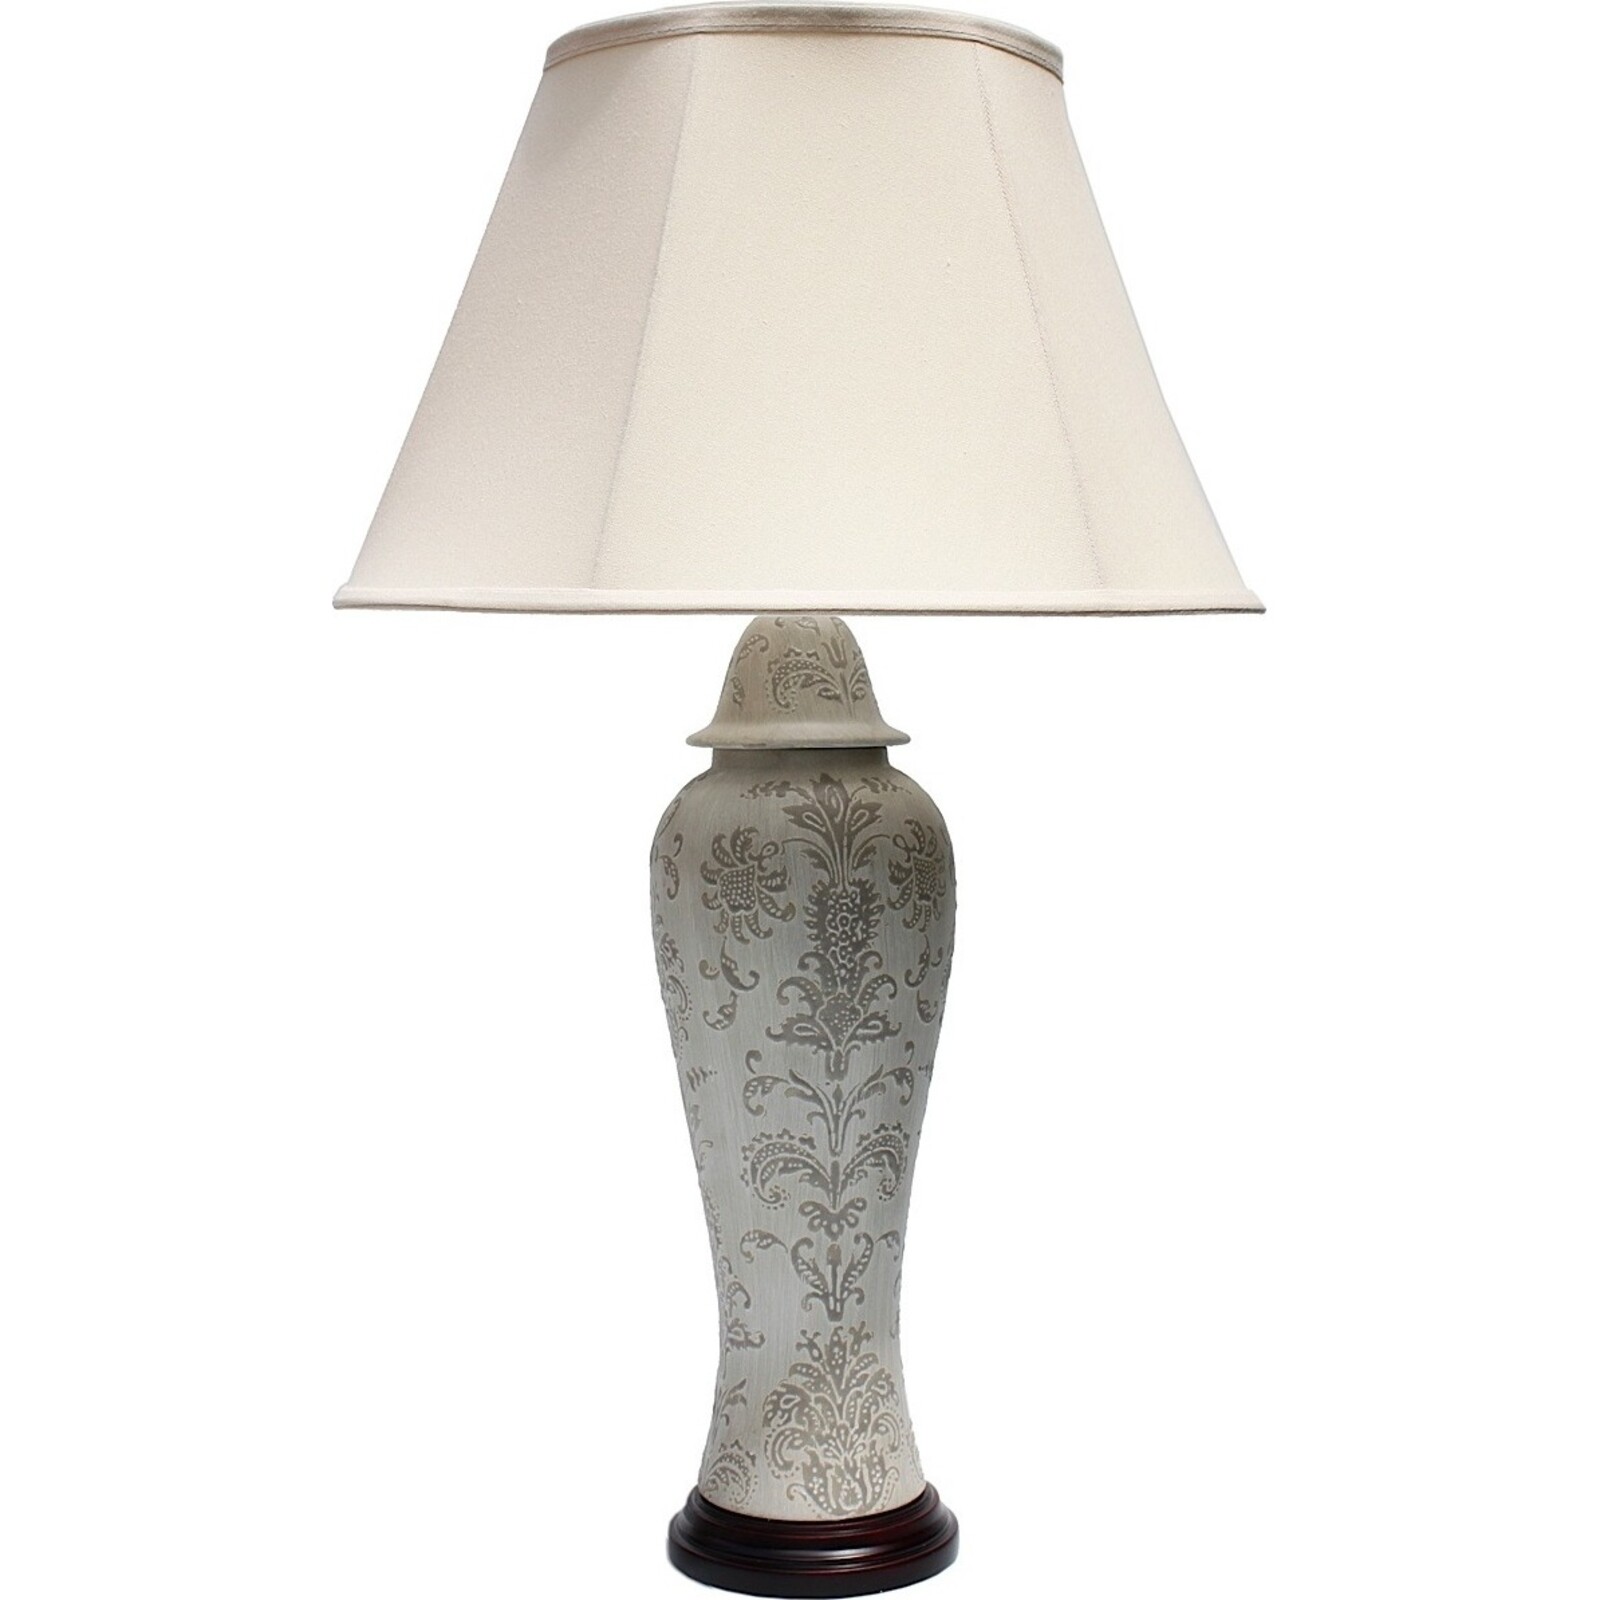 Table Lamp - Grey Decal Large